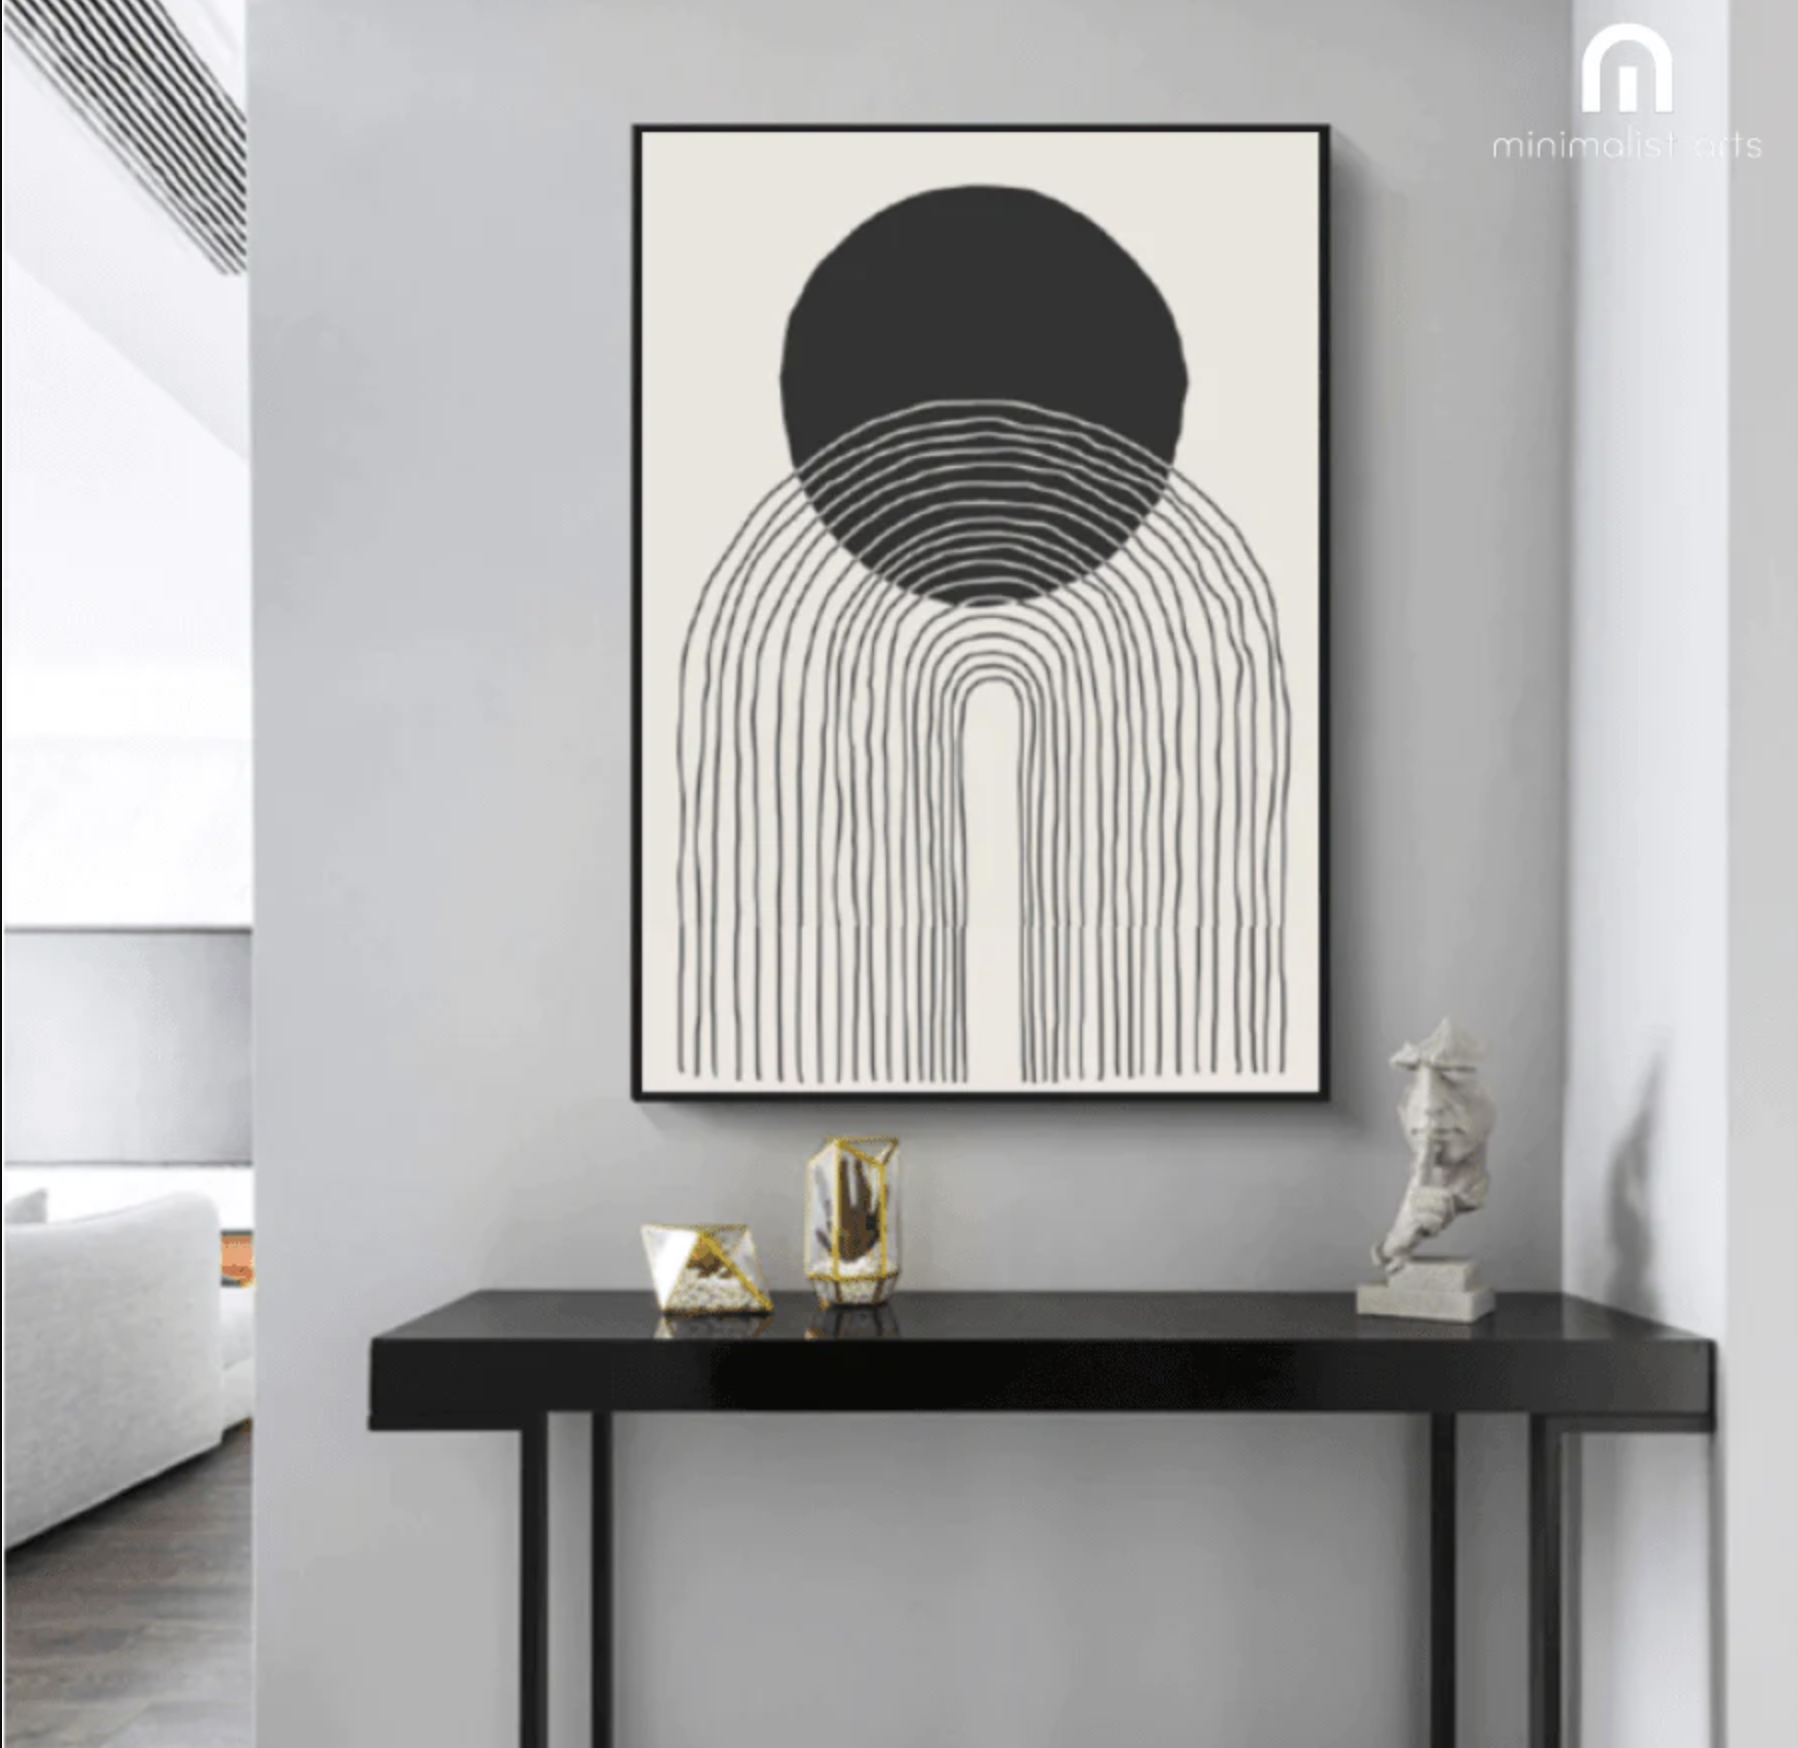 Minimalist Wall Art for Modern Office Spaces